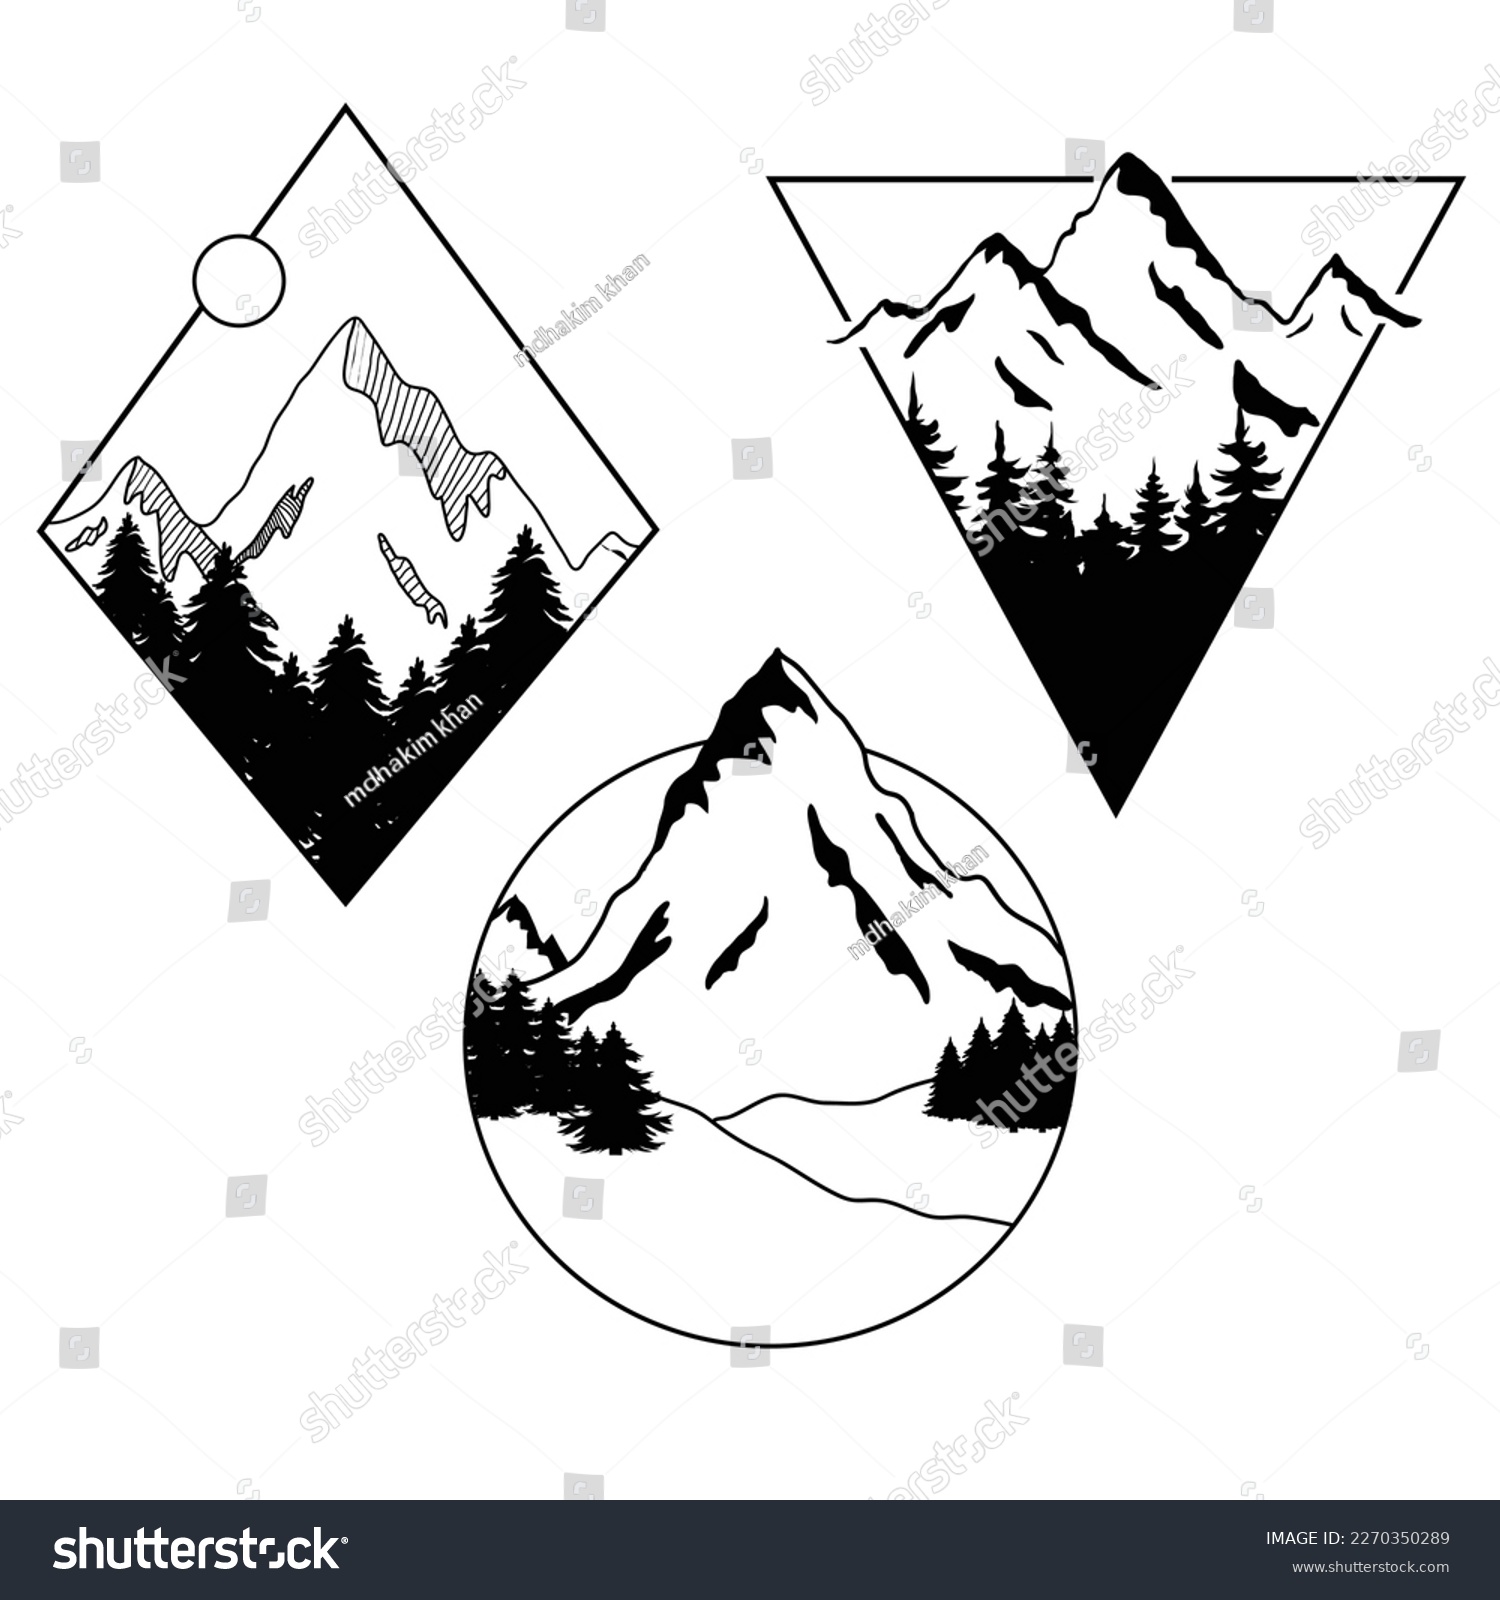 SVG of Geometric mountains svg, mountain svg outline, camping outdoors adventure svg svg